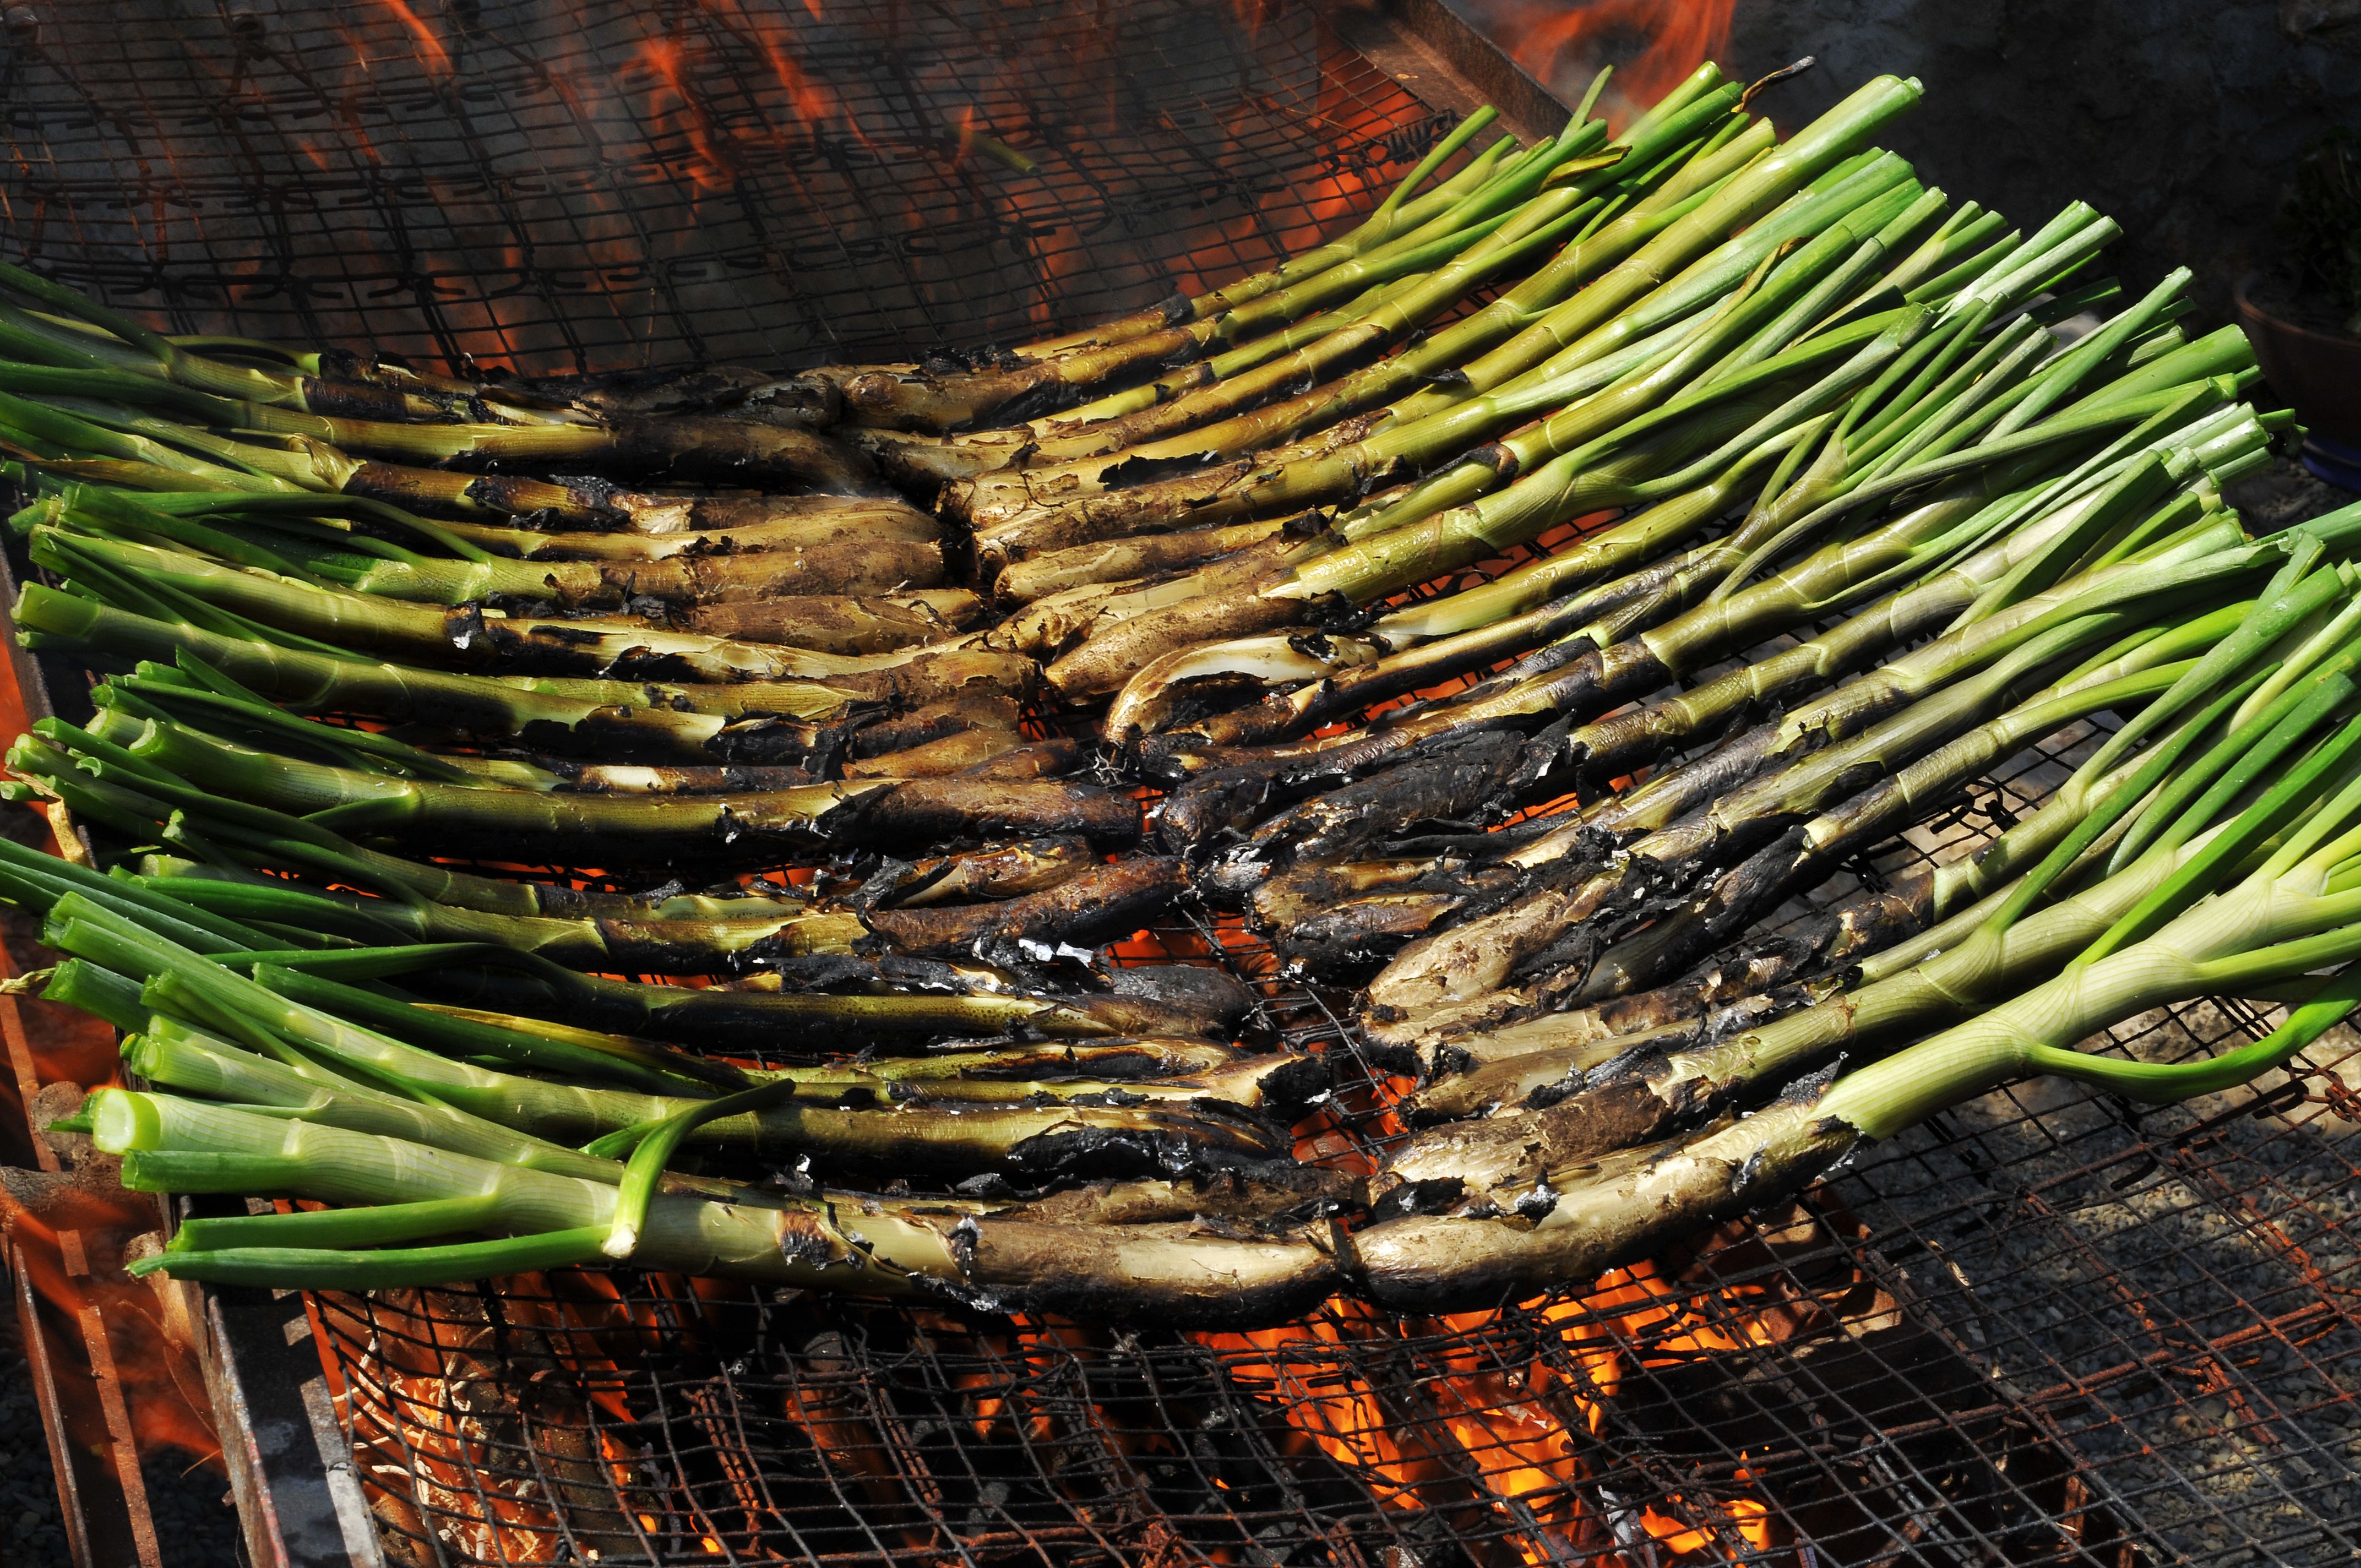 a pile of calcots typical catalan sweet onions on the barbecue